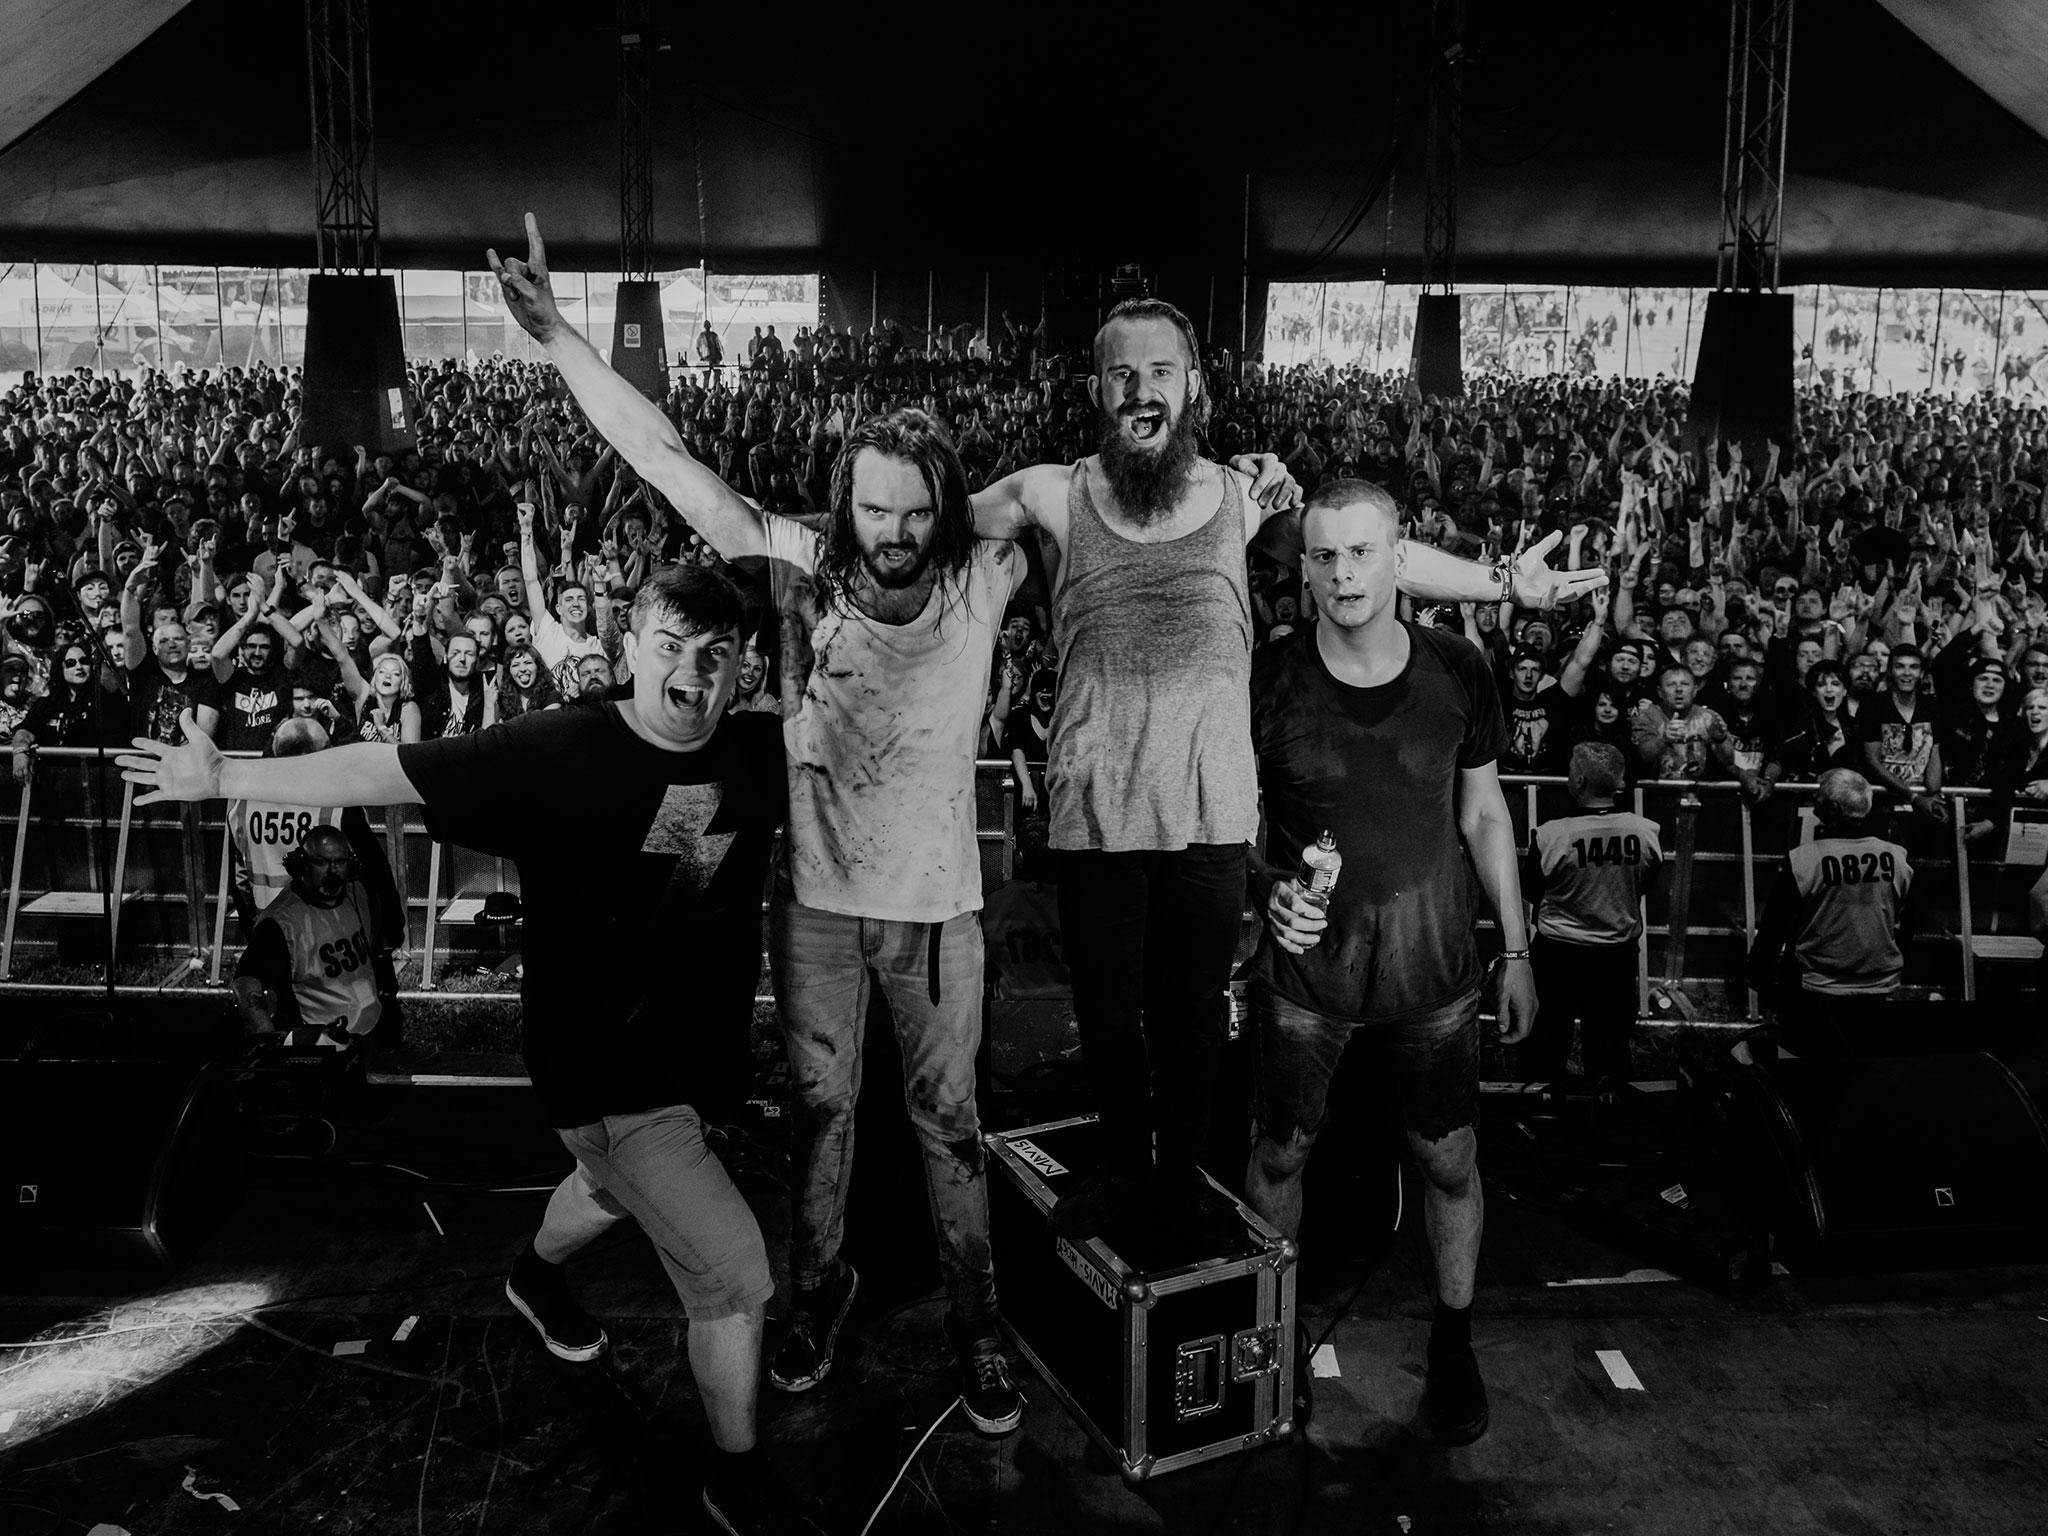 Heck, from left to right, Paul Shelley, Matt Reynolds, Jonny Hall and Tom Marsh, at the end of their triumphant set at Download 2016